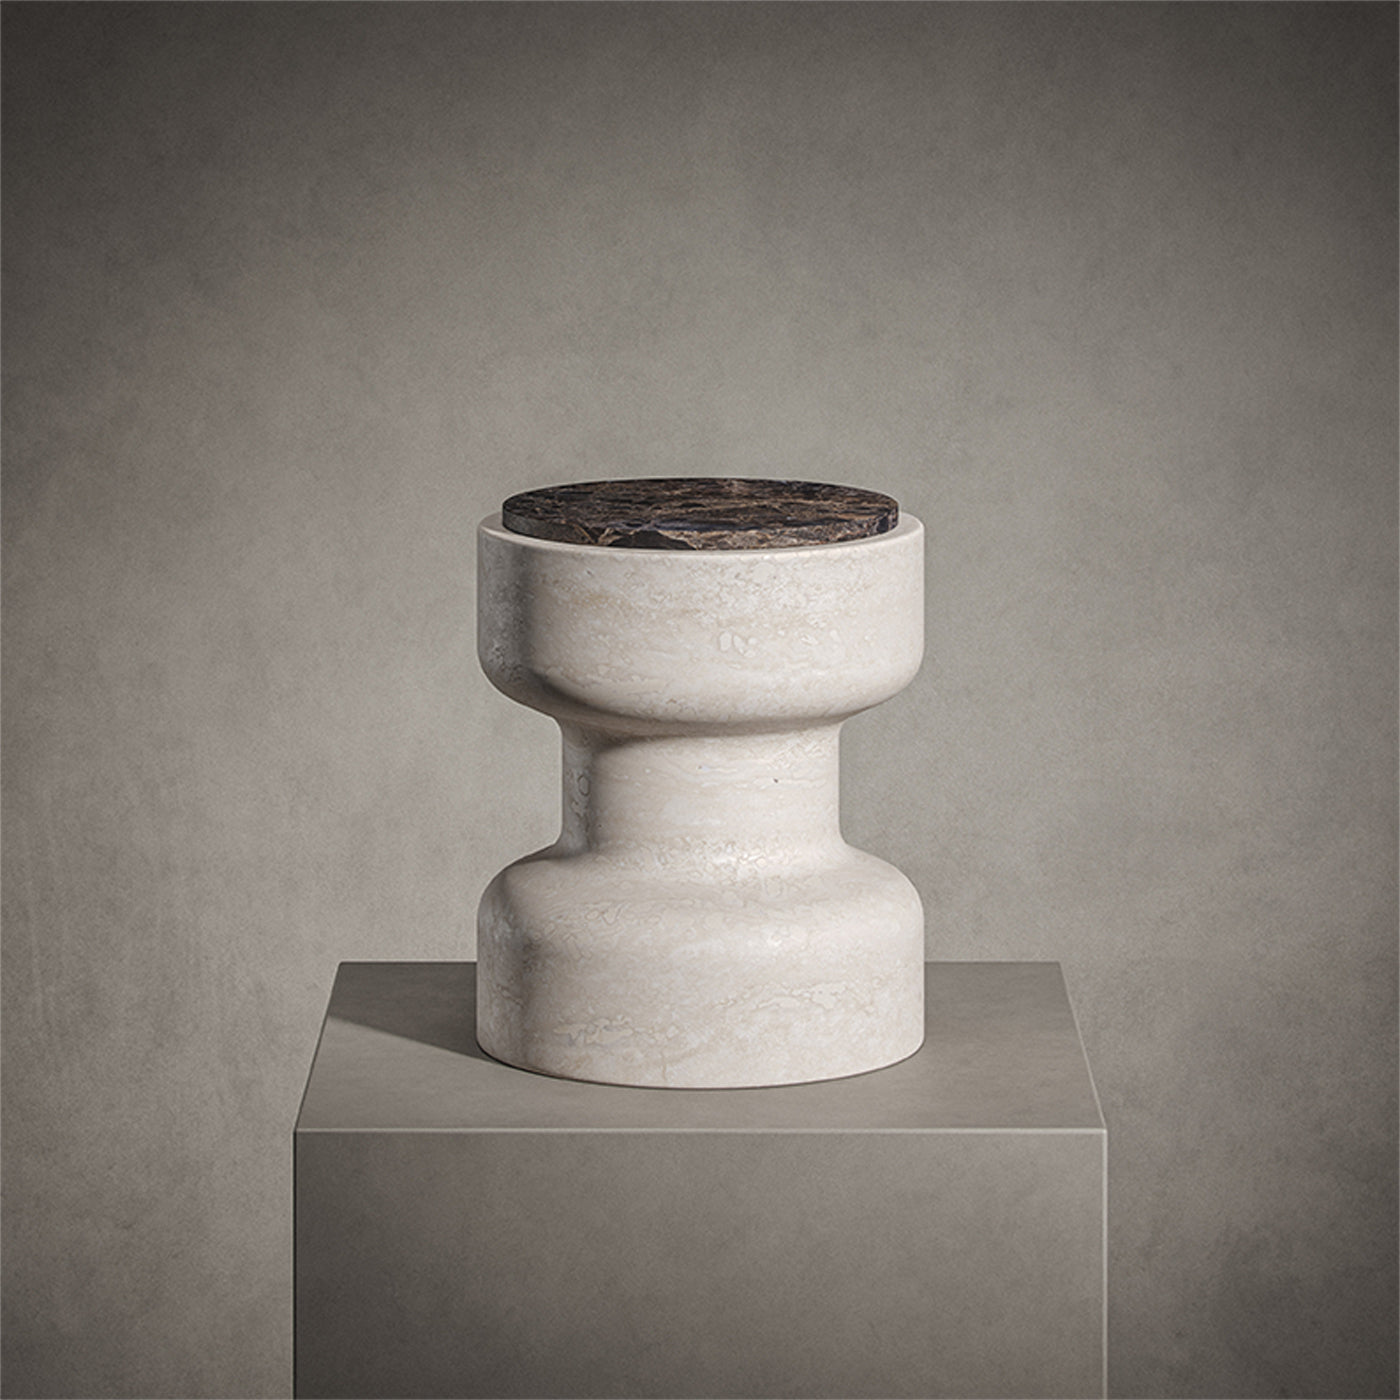 Tivoli Stool in travertine and marble by Ivan Colominas - Alternative view 2